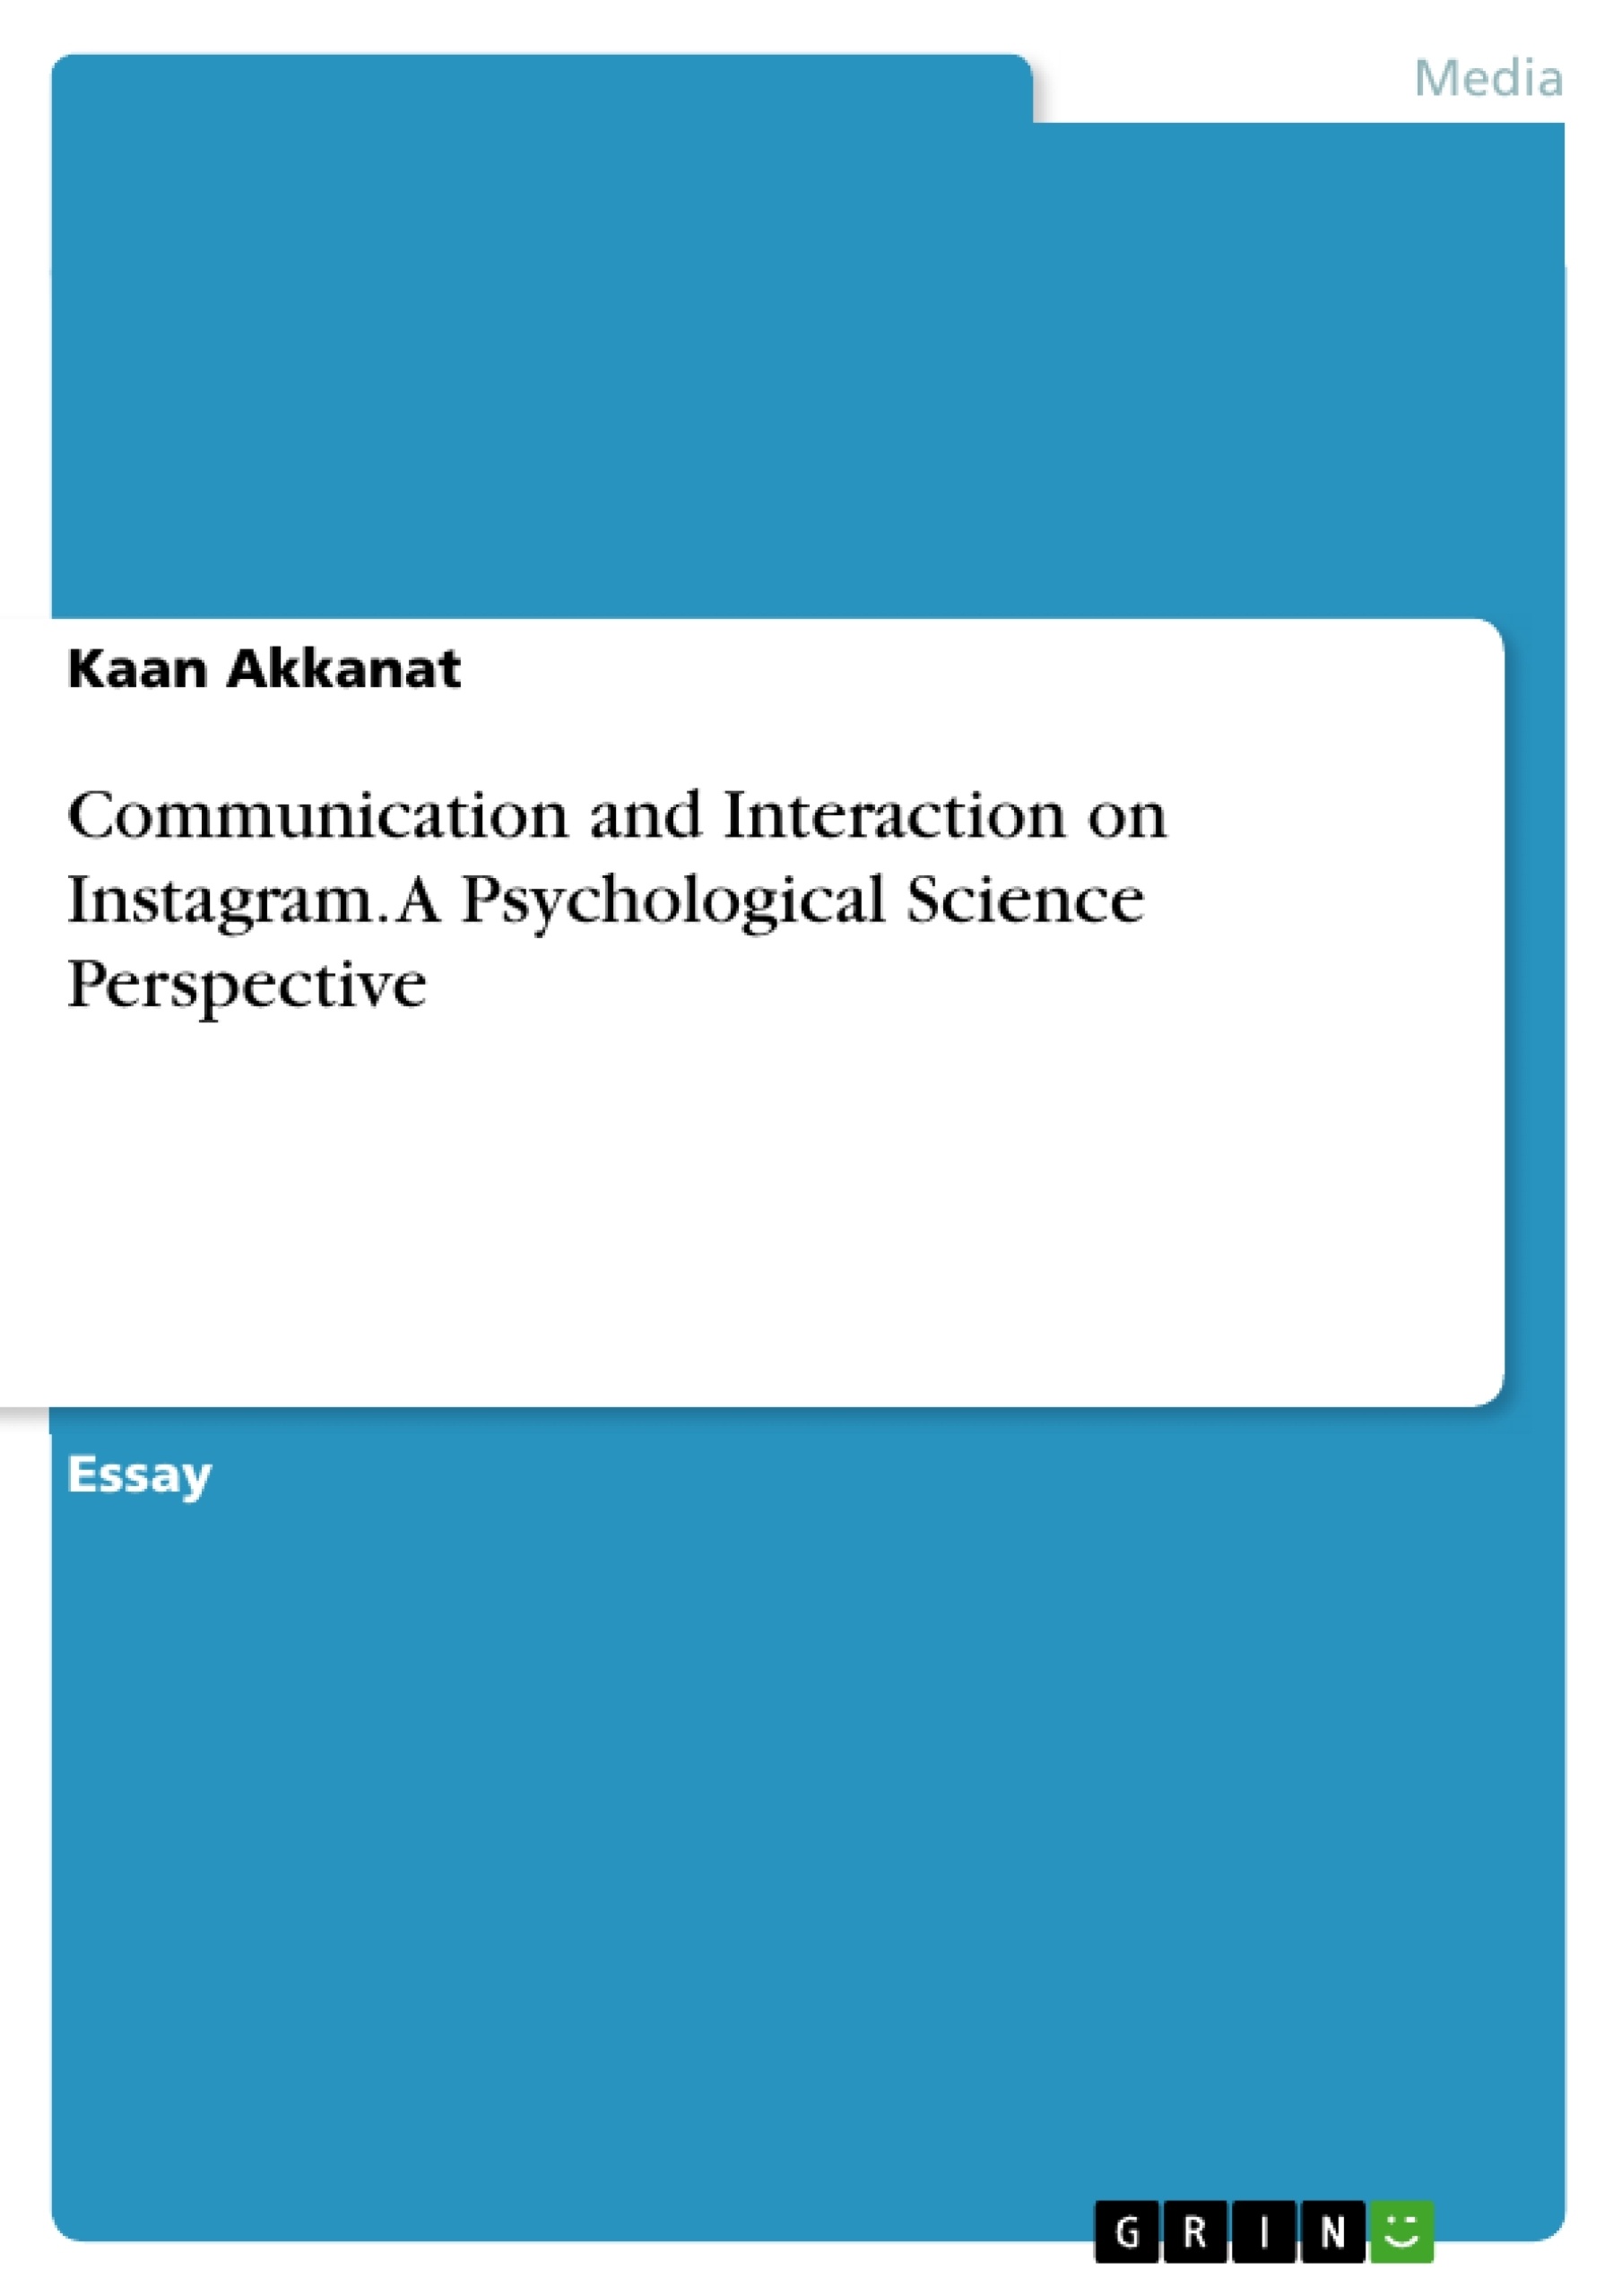 Título: Communication and Interaction on Instagram. A Psychological Science Perspective